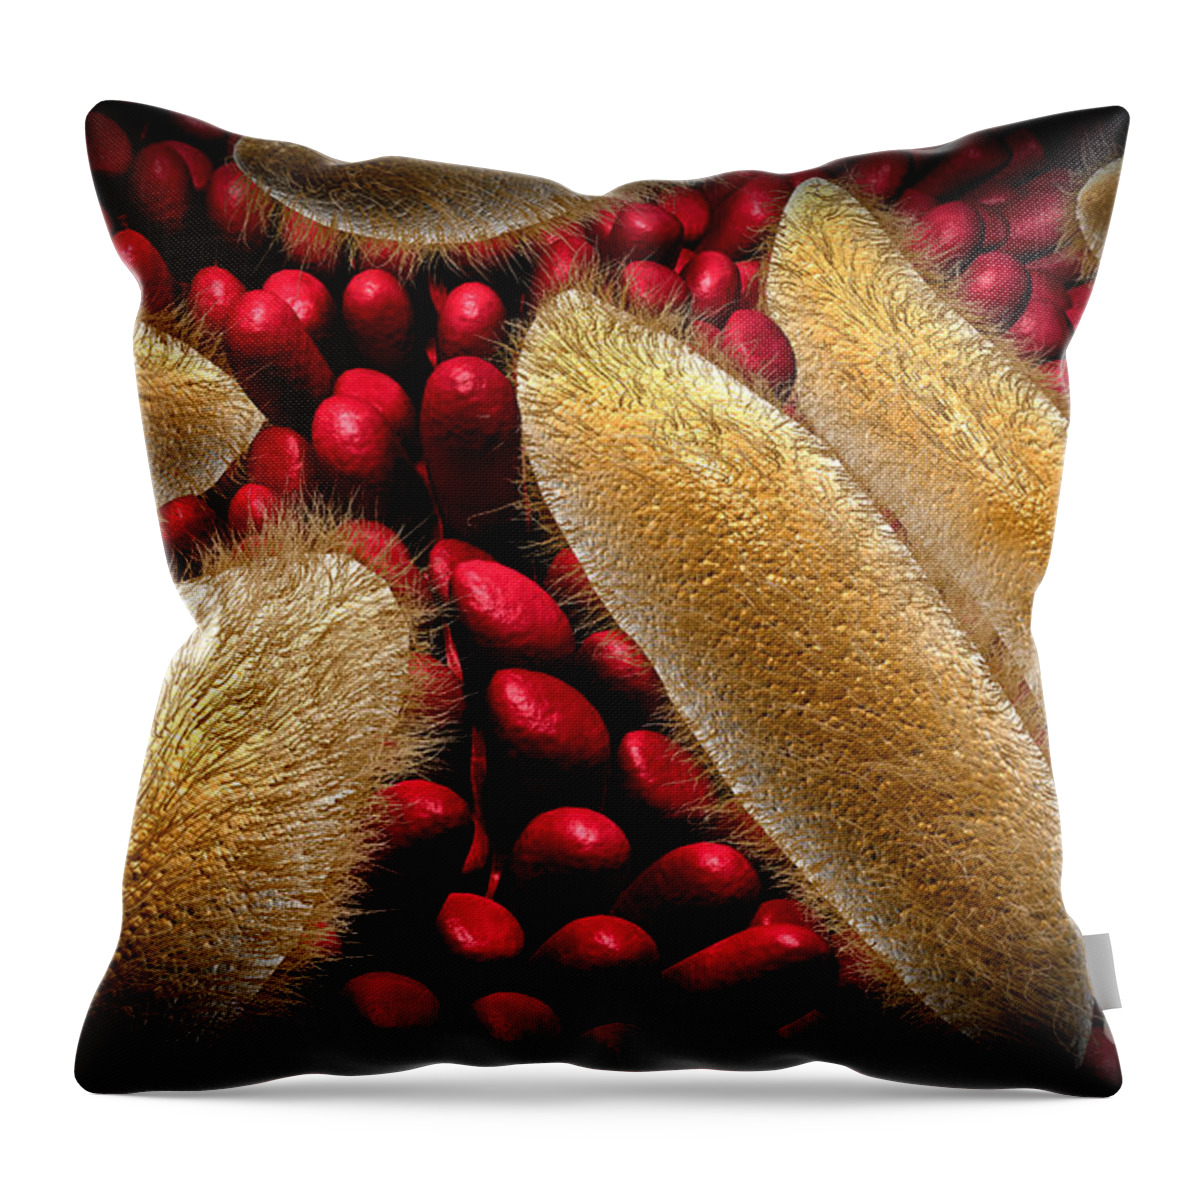 Red Throw Pillow featuring the digital art Conceptual Image Of Paramecium #1 by Stocktrek Images